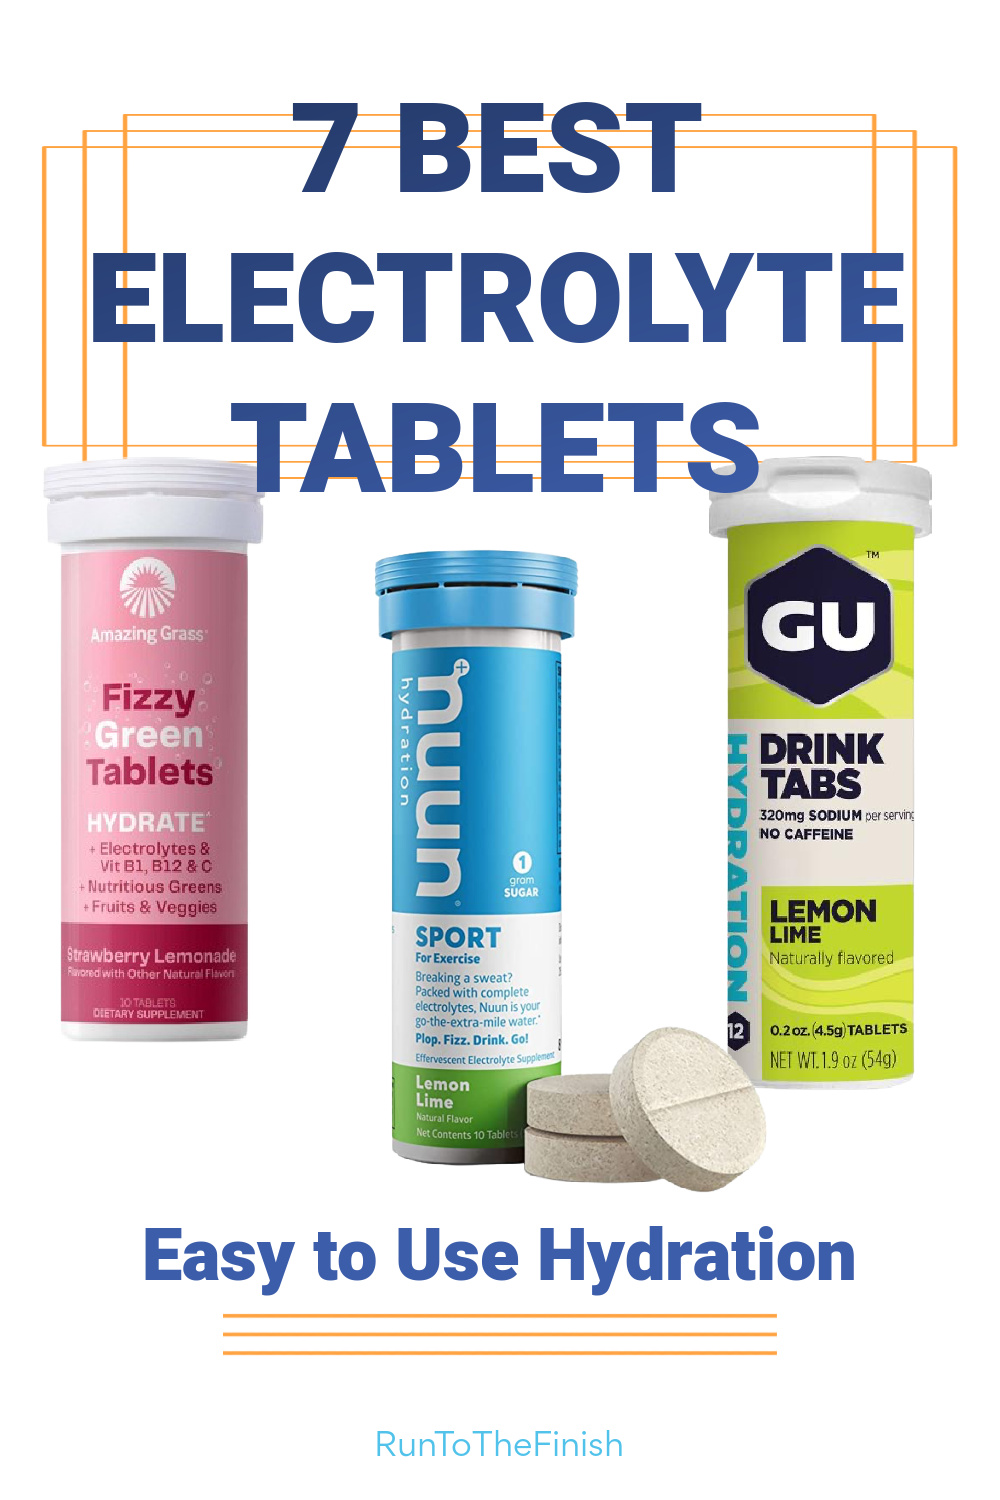 Electrolyte tablets for hydration